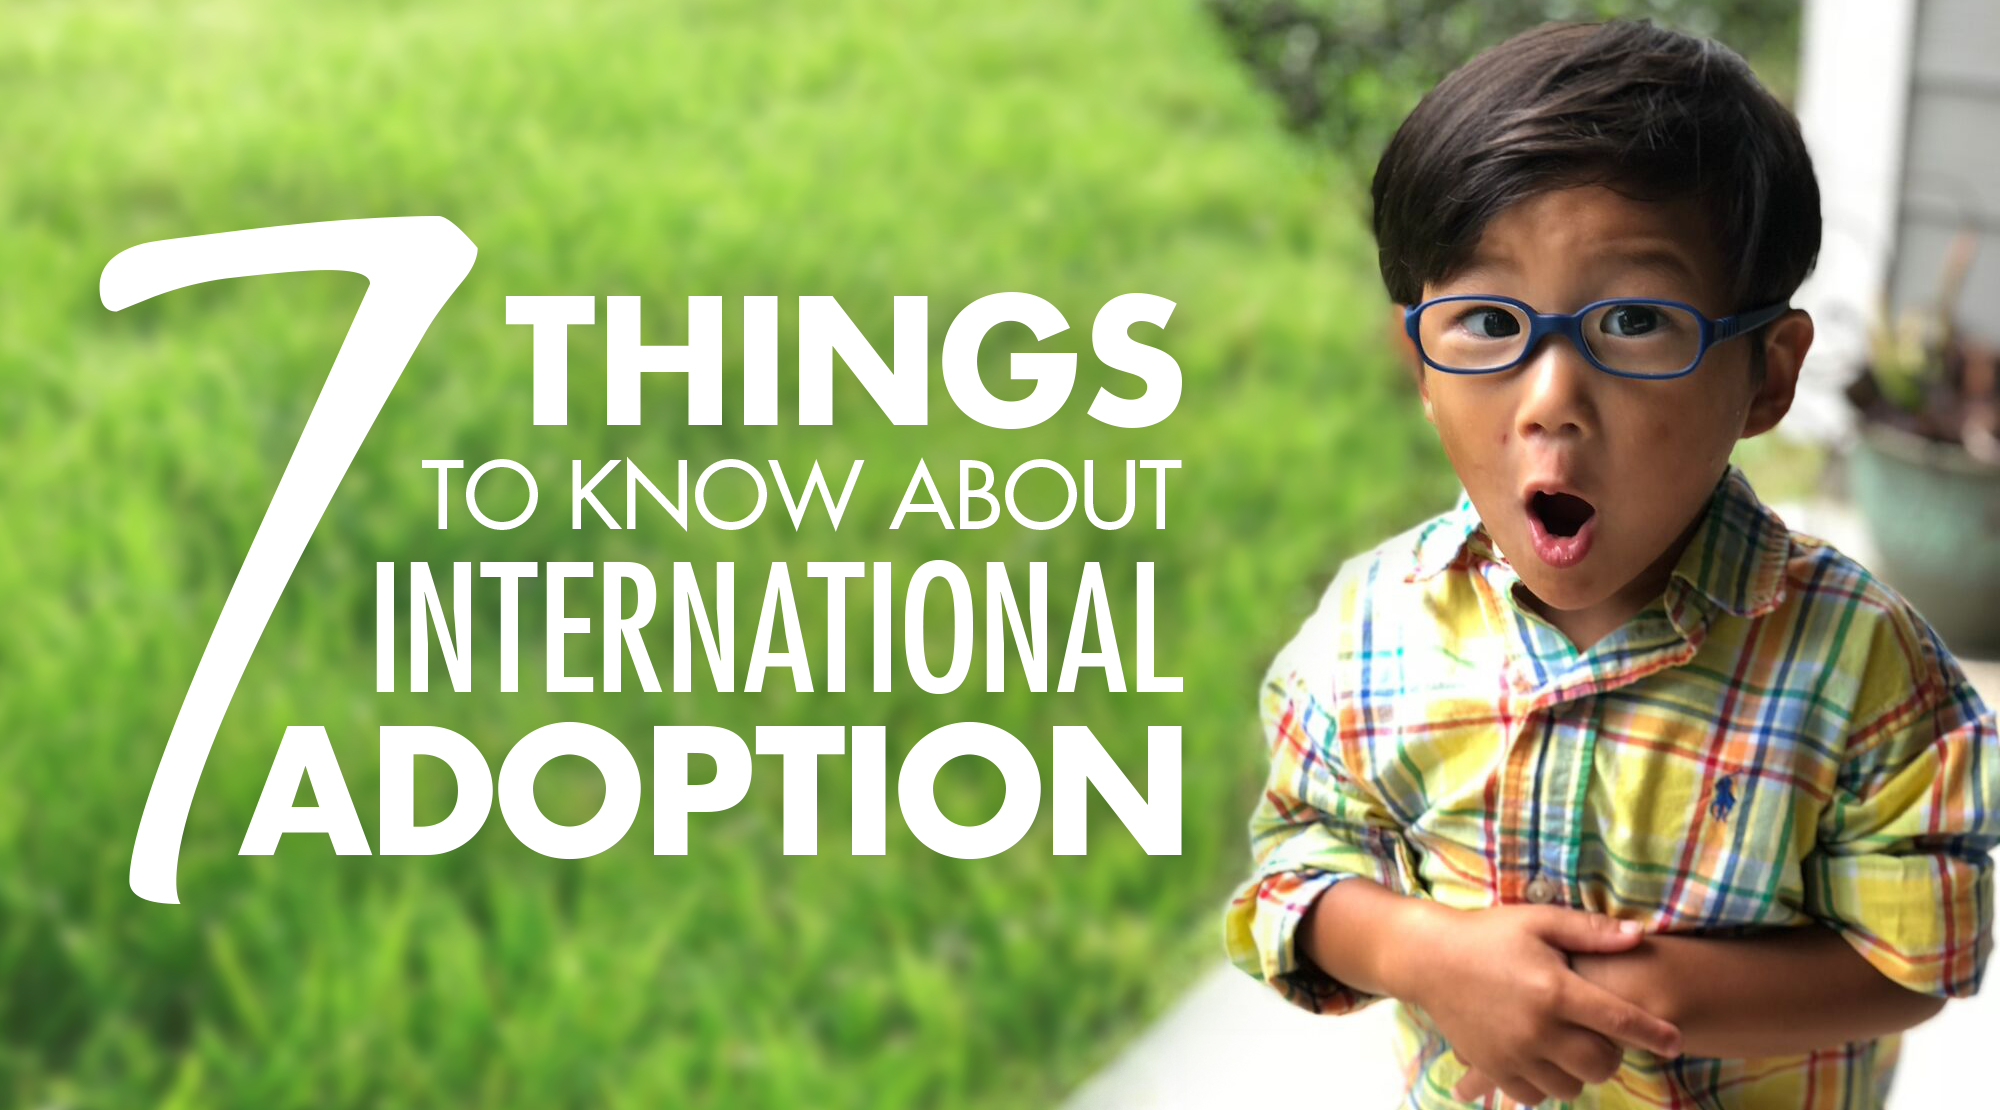 7 things to know about international adoption